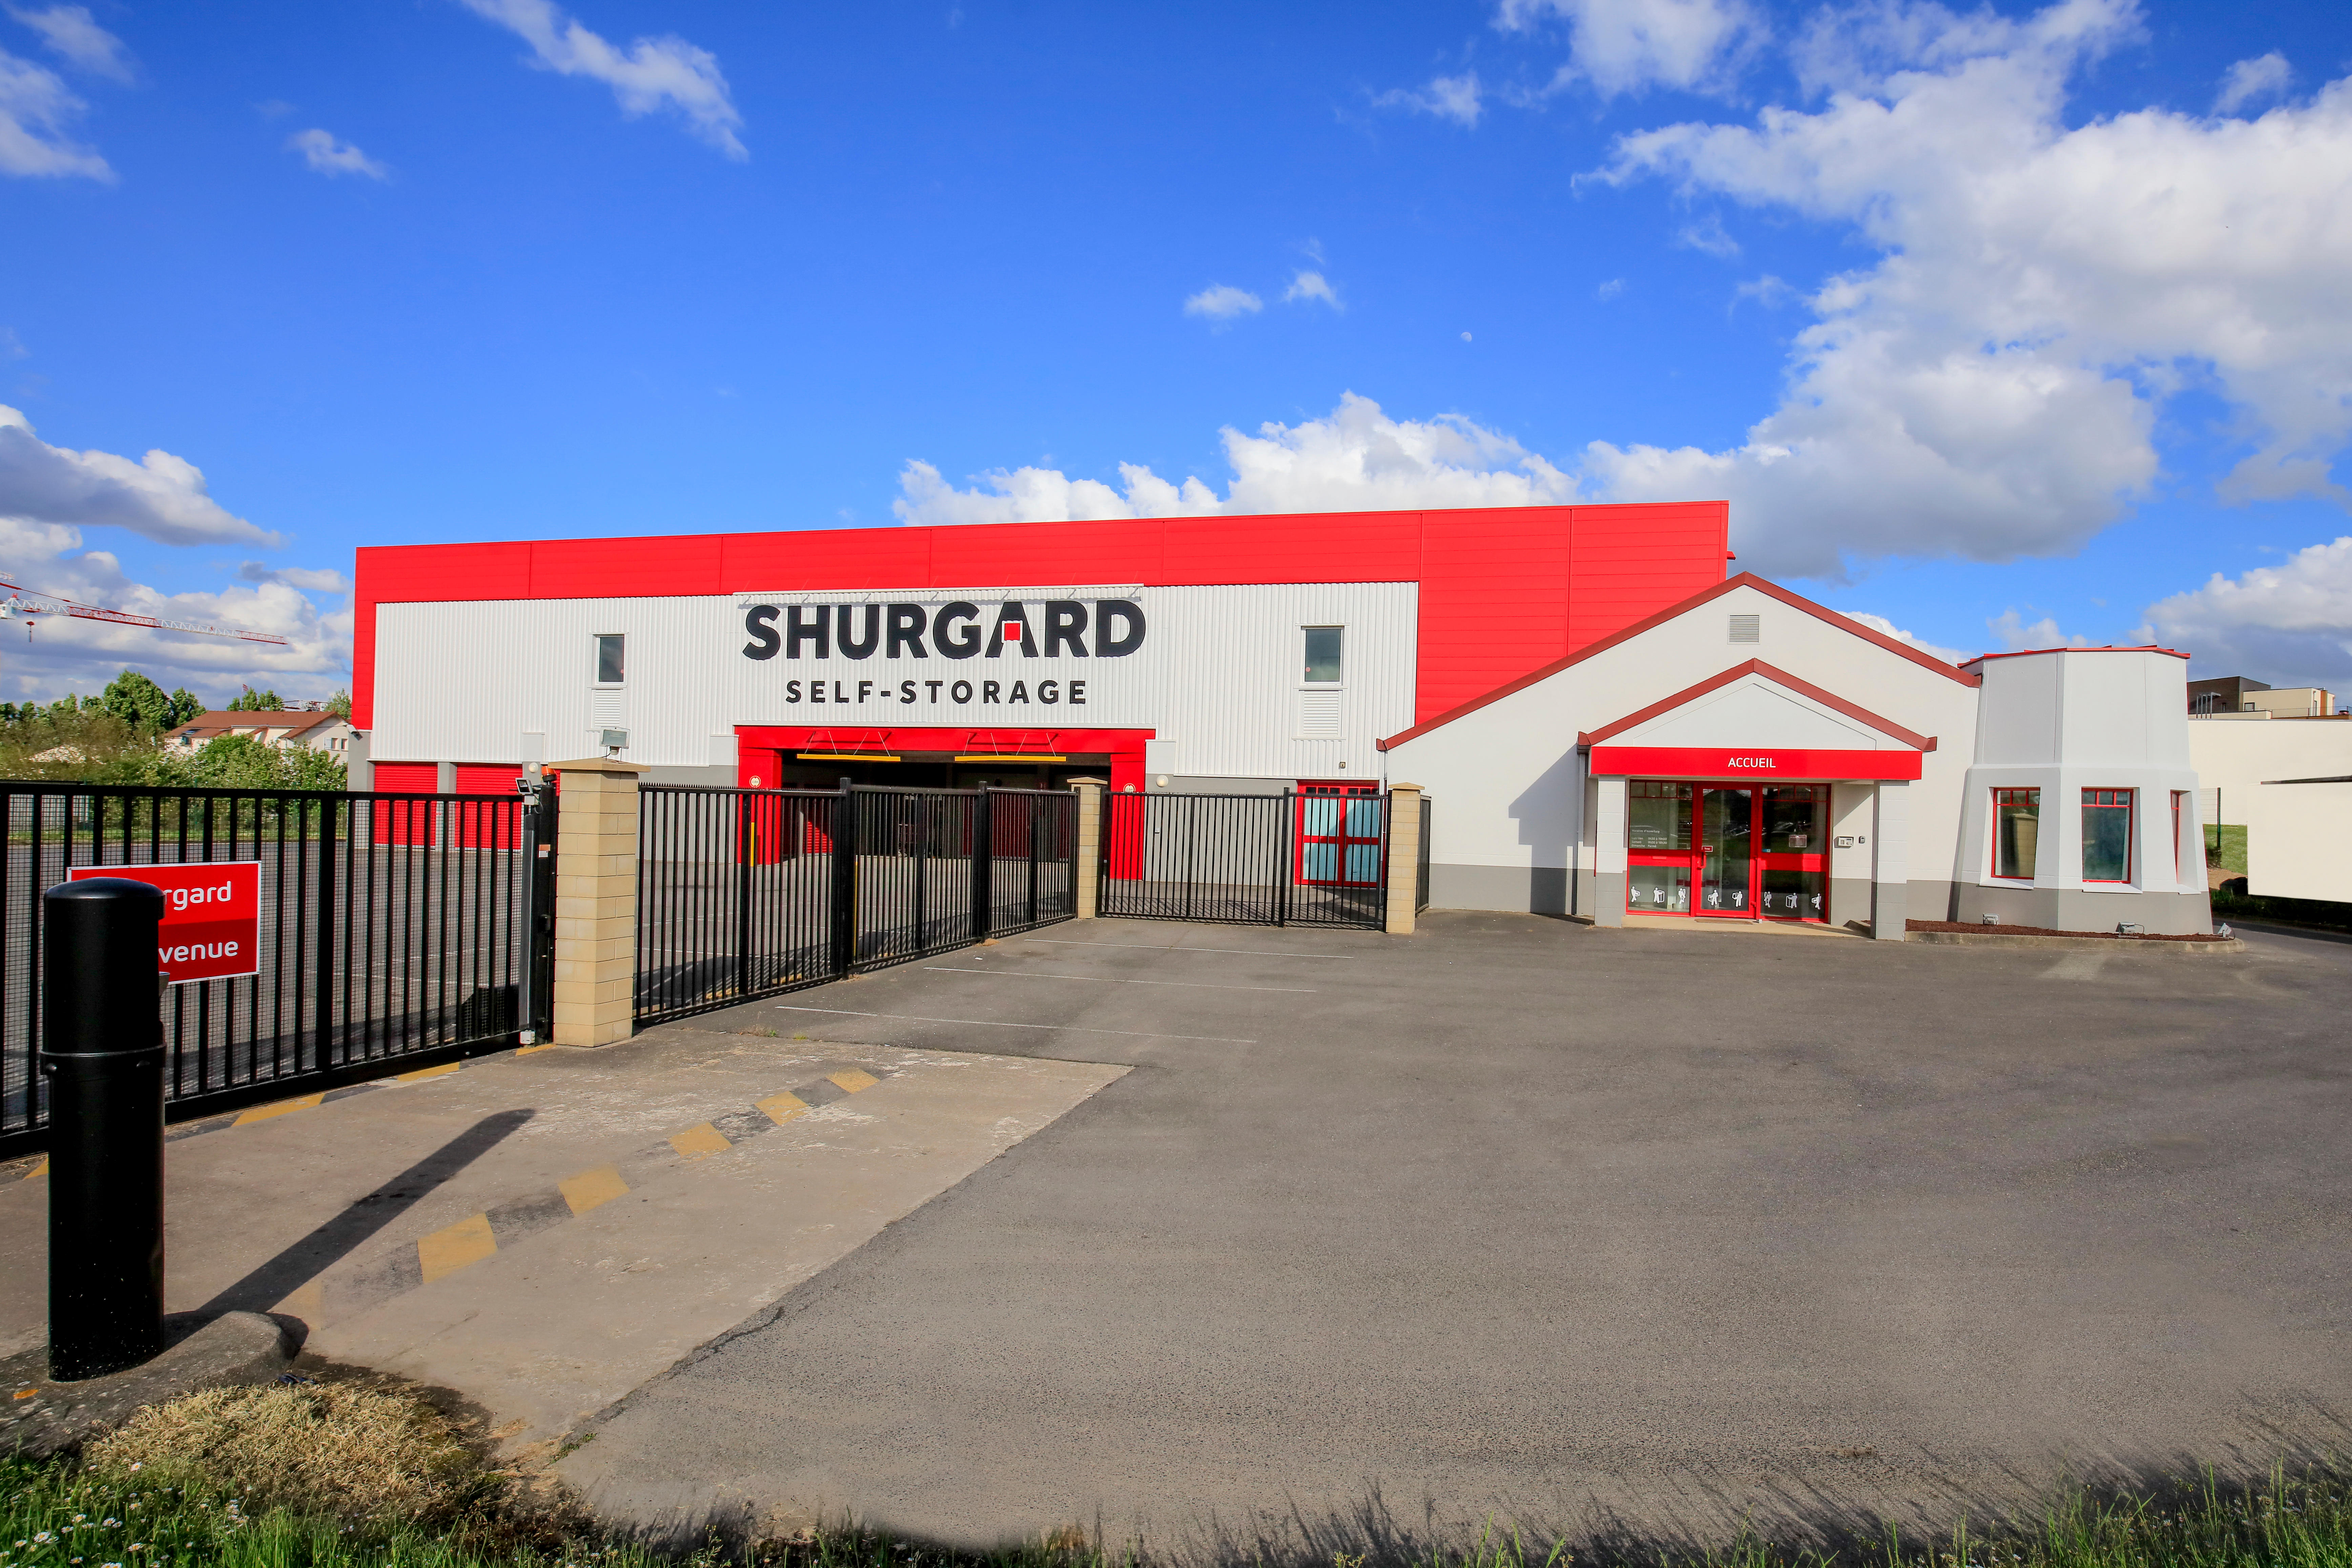 Images Shurgard Self Storage Ballainvilliers - Montlhéry